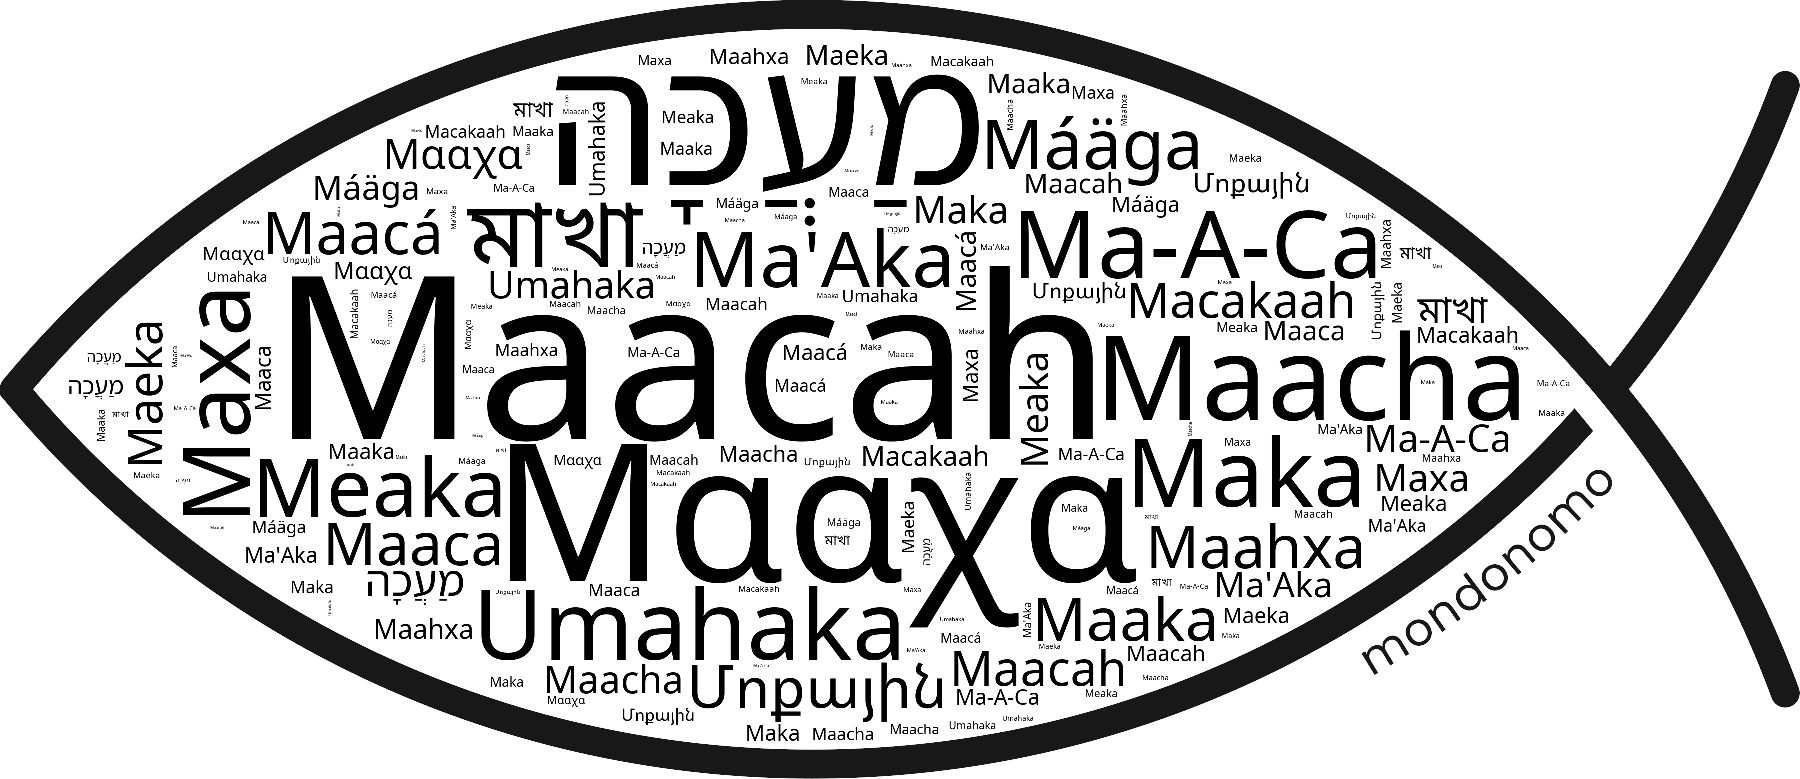 Name Maacah in the world's Bibles